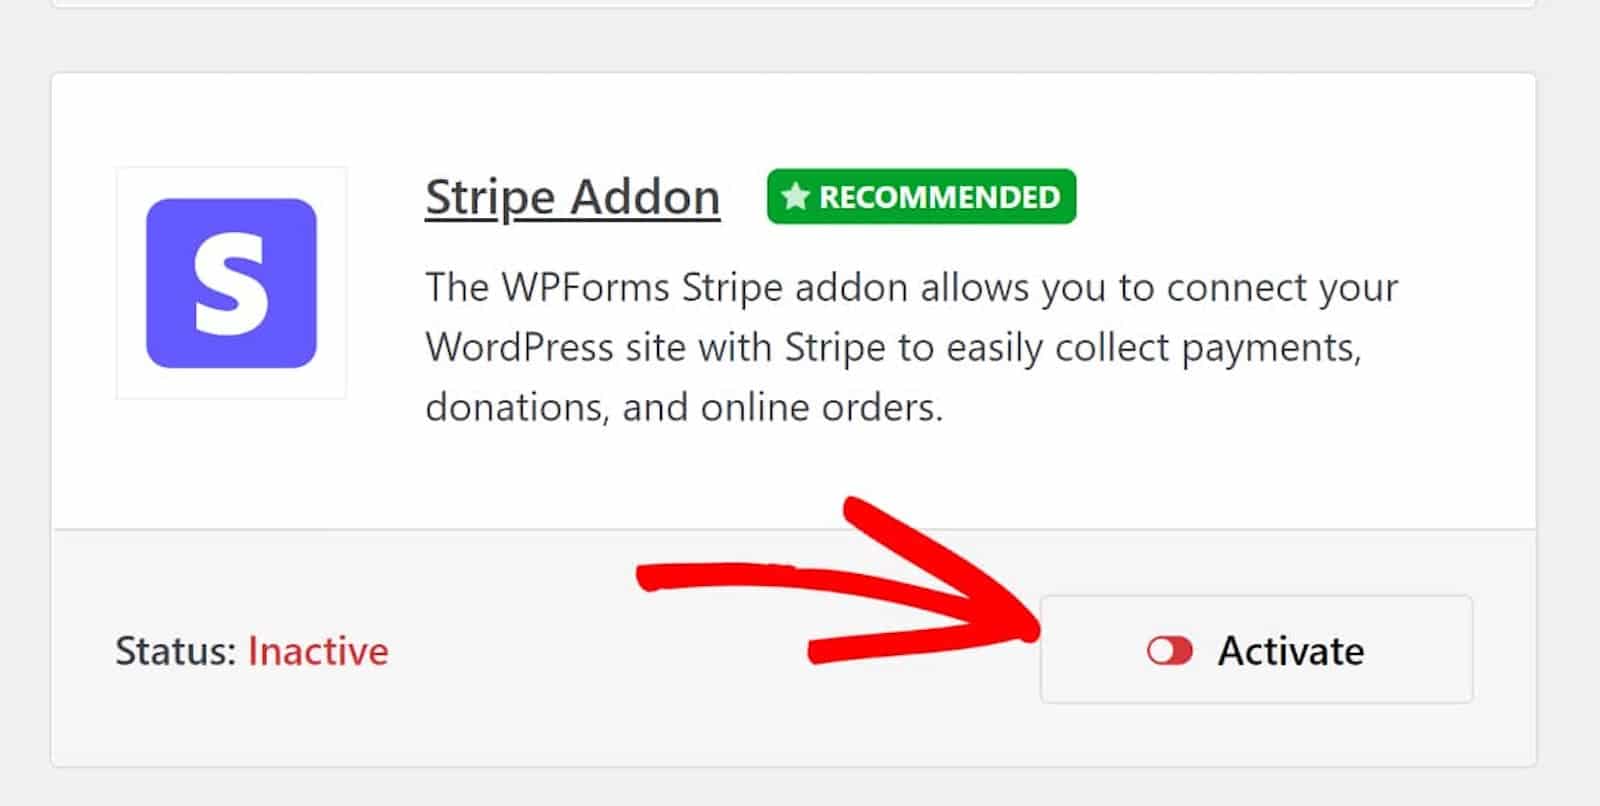 Activating the Stripe addon